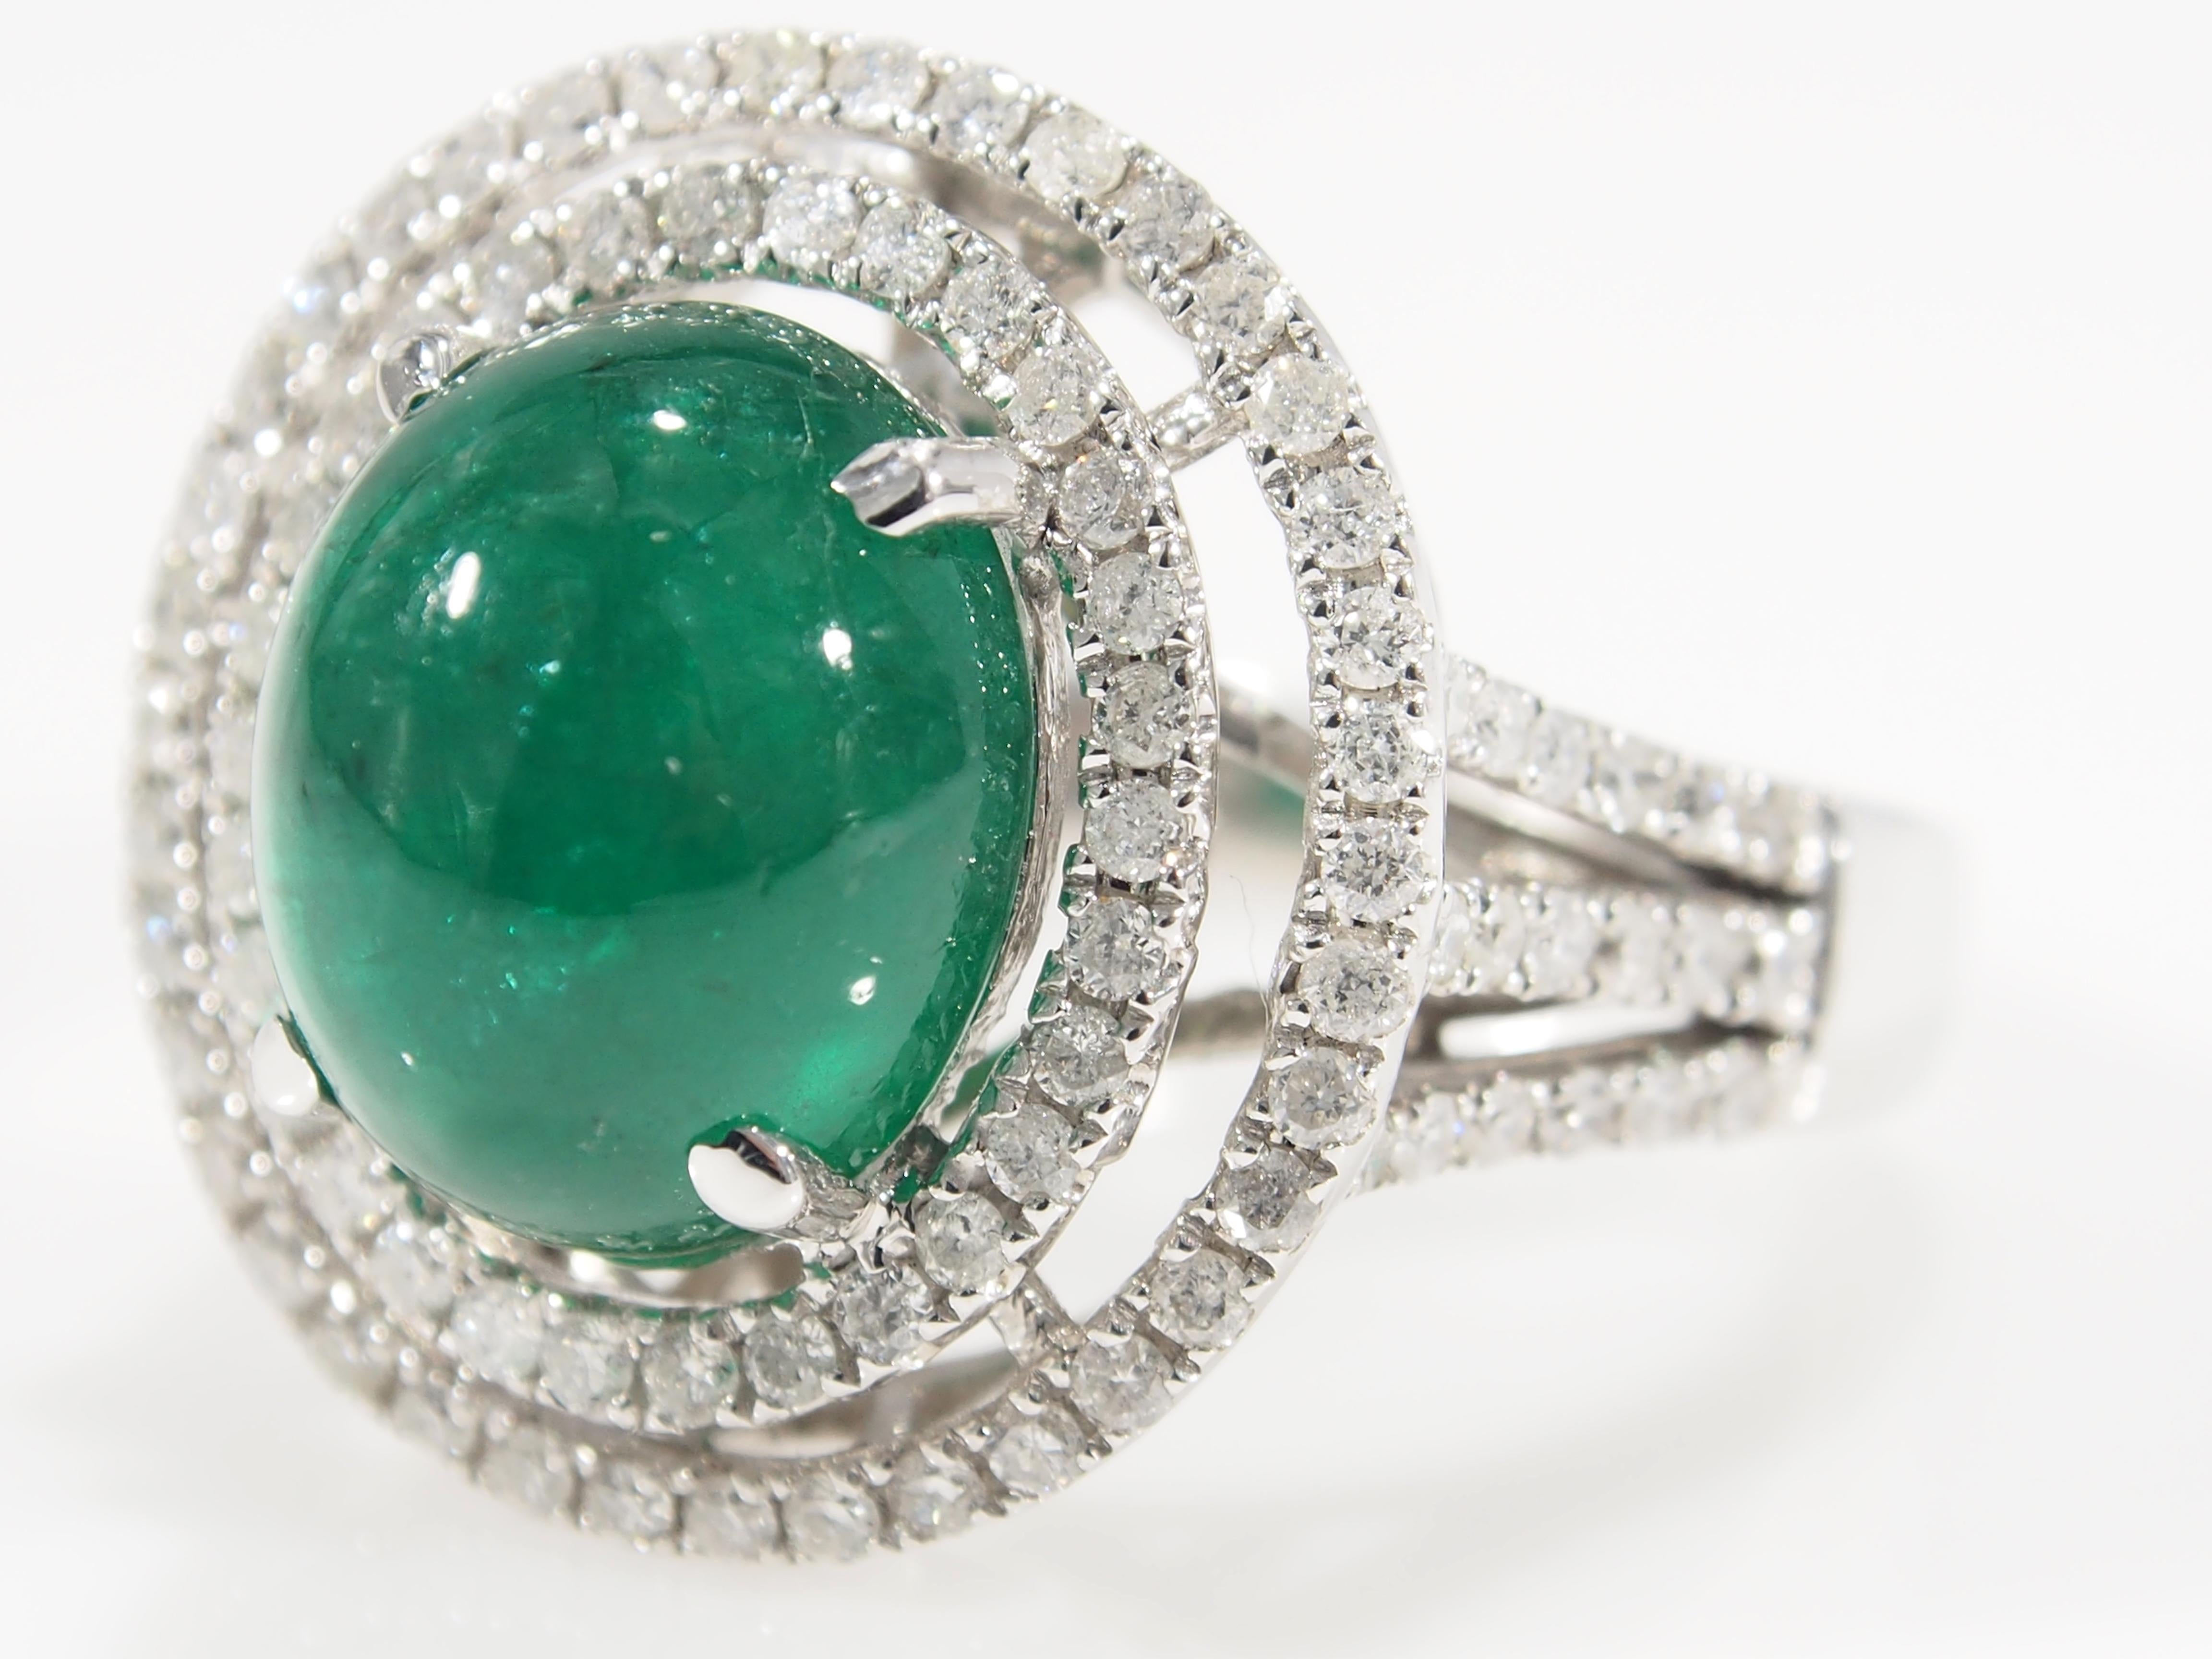 For the jewelry lover that appreciates Emeralds is this striking 6.10 Carat. Emerald Cabochon Ring. Fashioned in 14 Karat White Gold with a double Halo of 104 Round Brilliant Cut Diamonds, approximately 1.04 Carat, G-J in Color, SI to I1 in Clarity